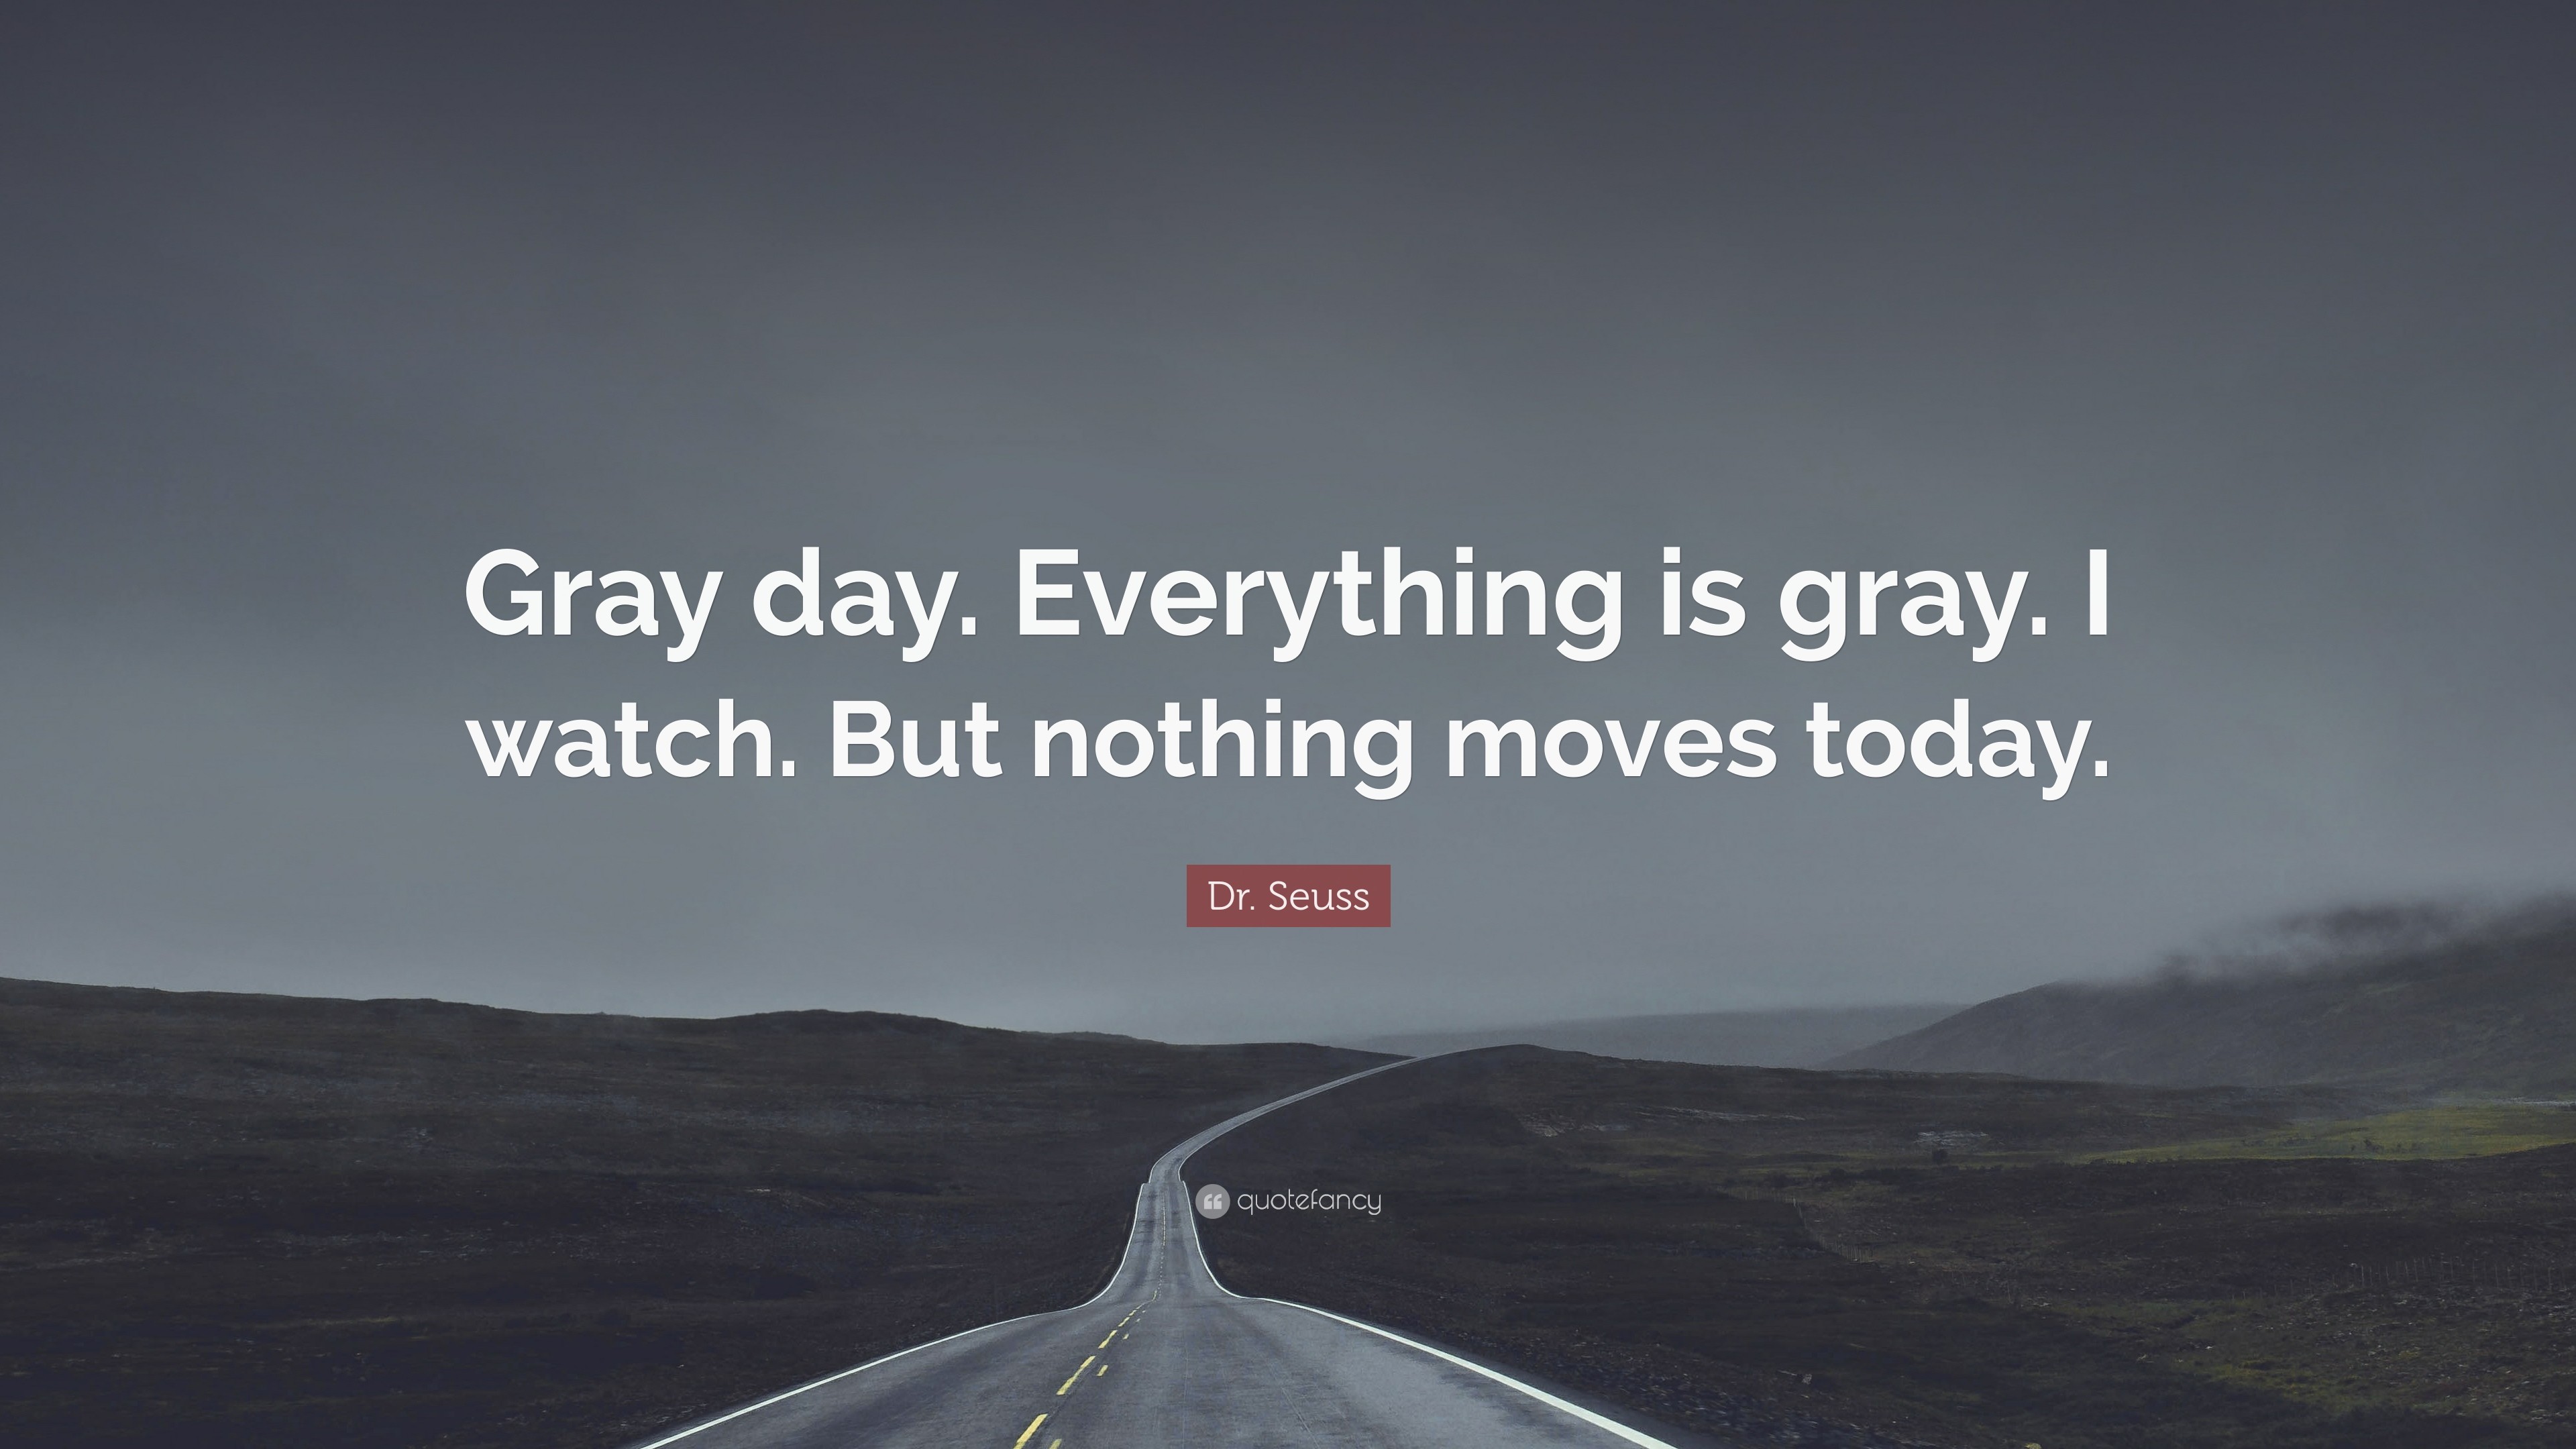 3840x2160 Dr. Seuss Quote: “Gray day. Everything is gray. I watch.